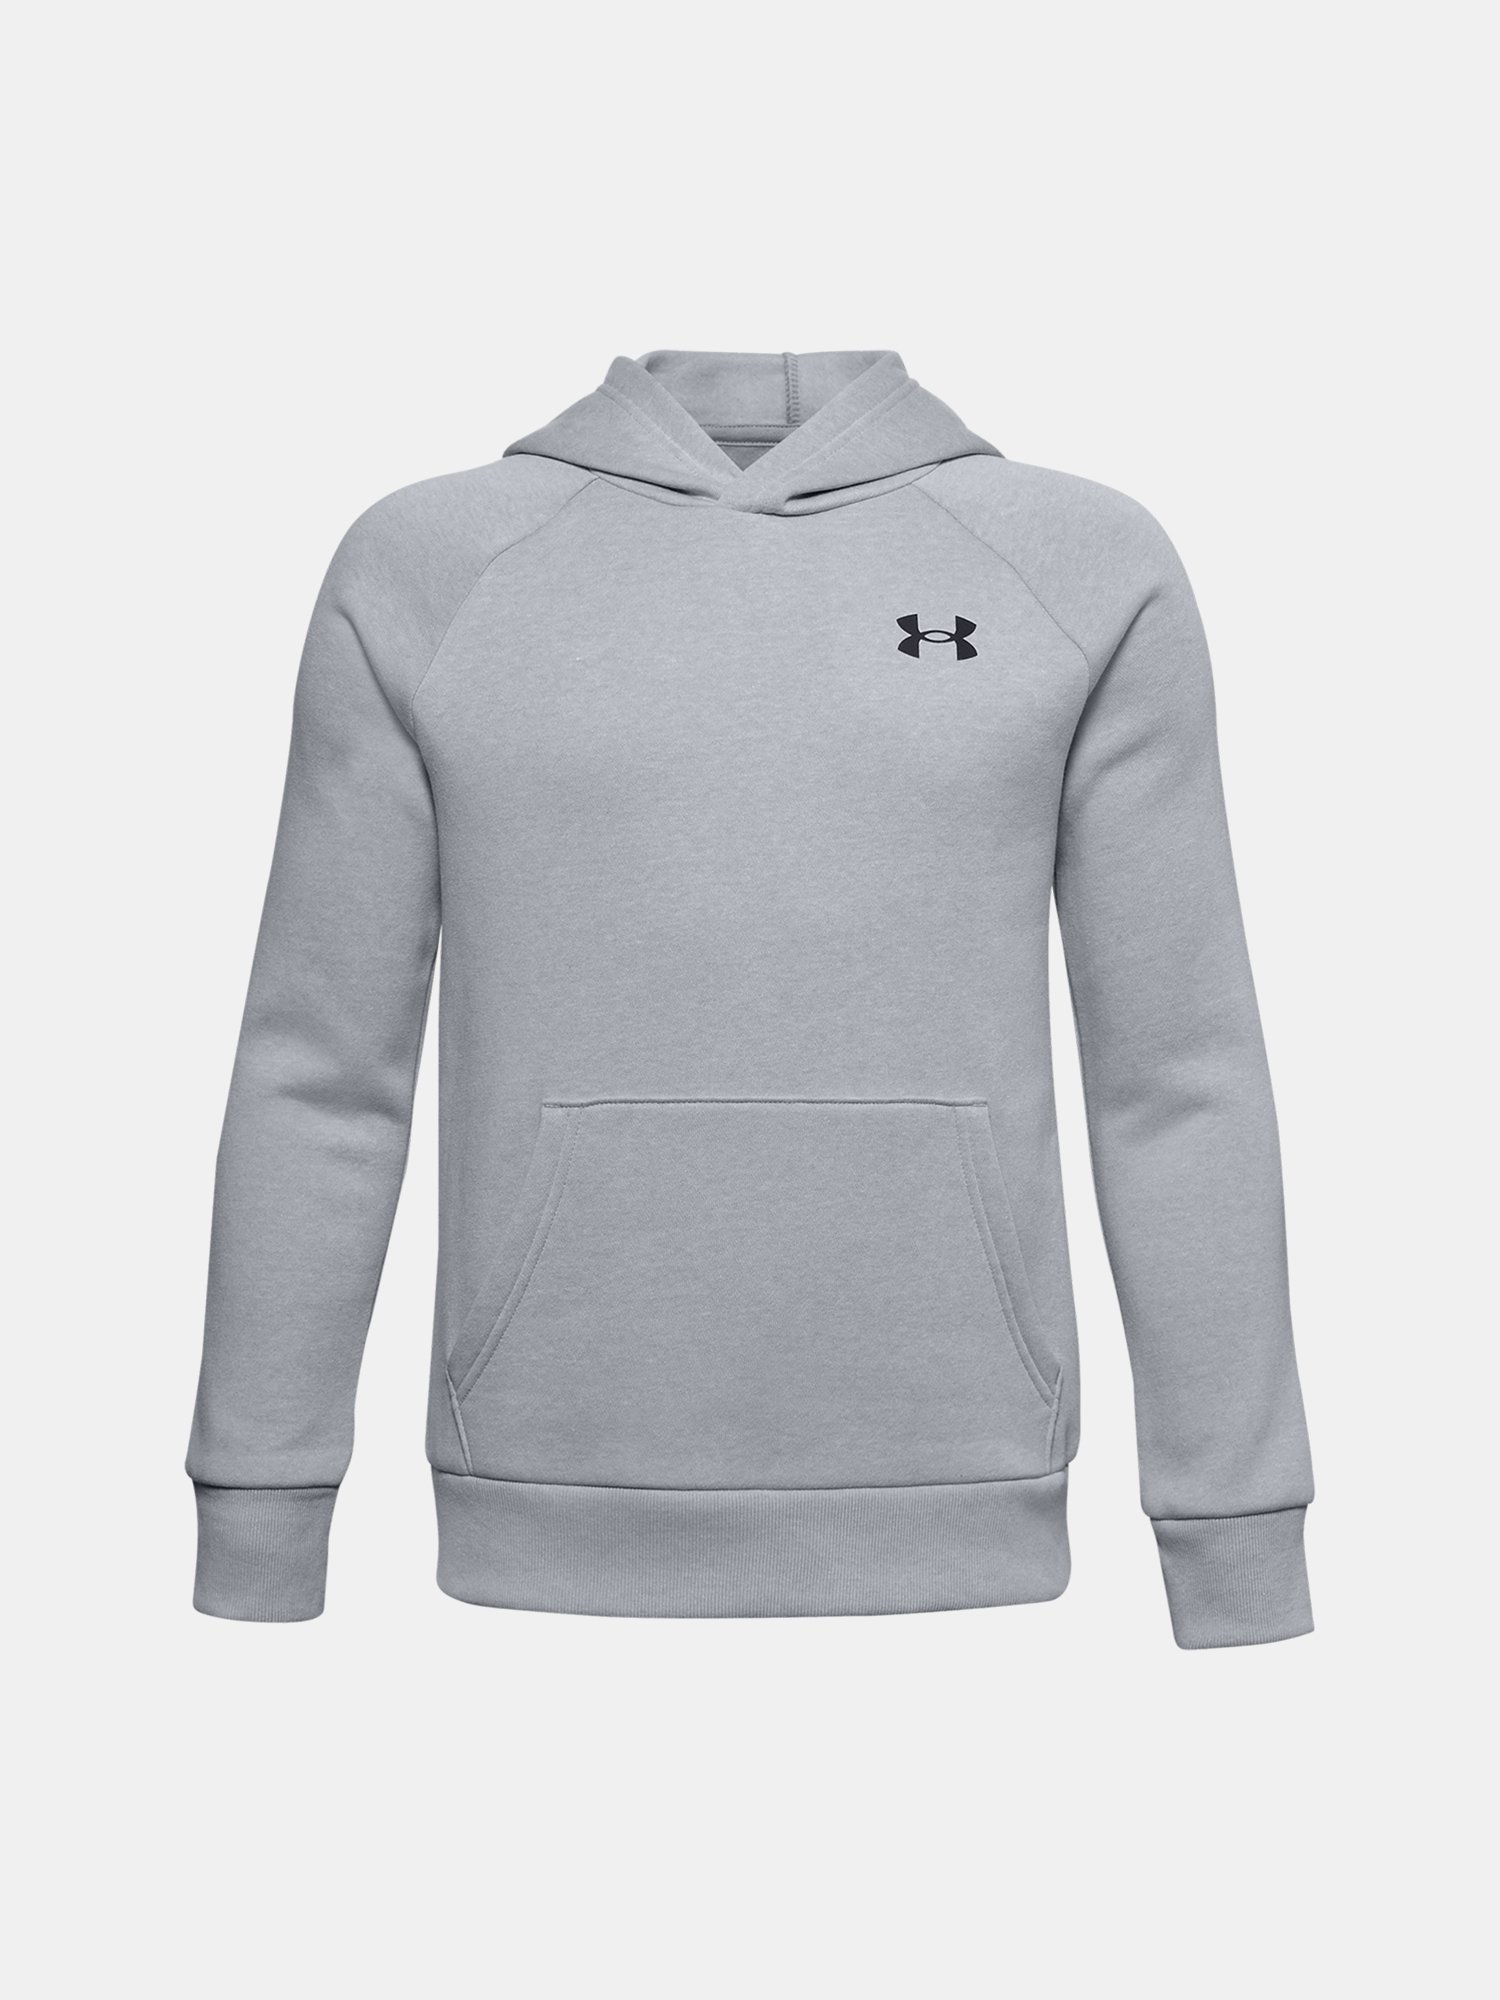 Mikina Under Armour RIVAL COTTON HOODIE - sivá